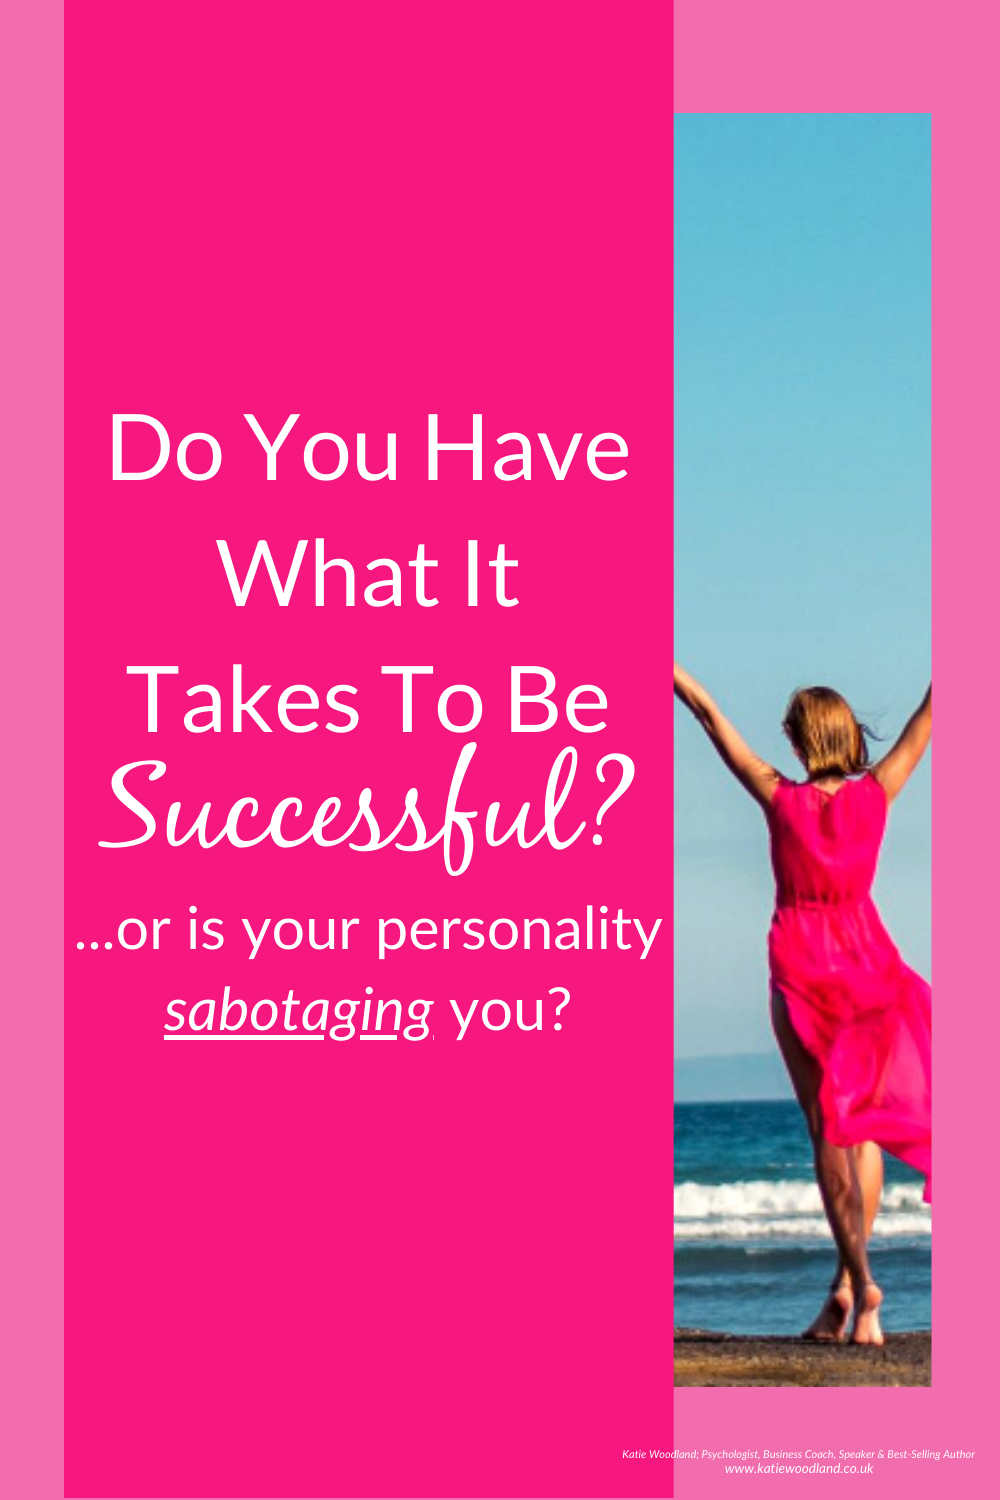 Do You Have What It Takes To Be Successful... Or Is Your Personality Sabotaging You?